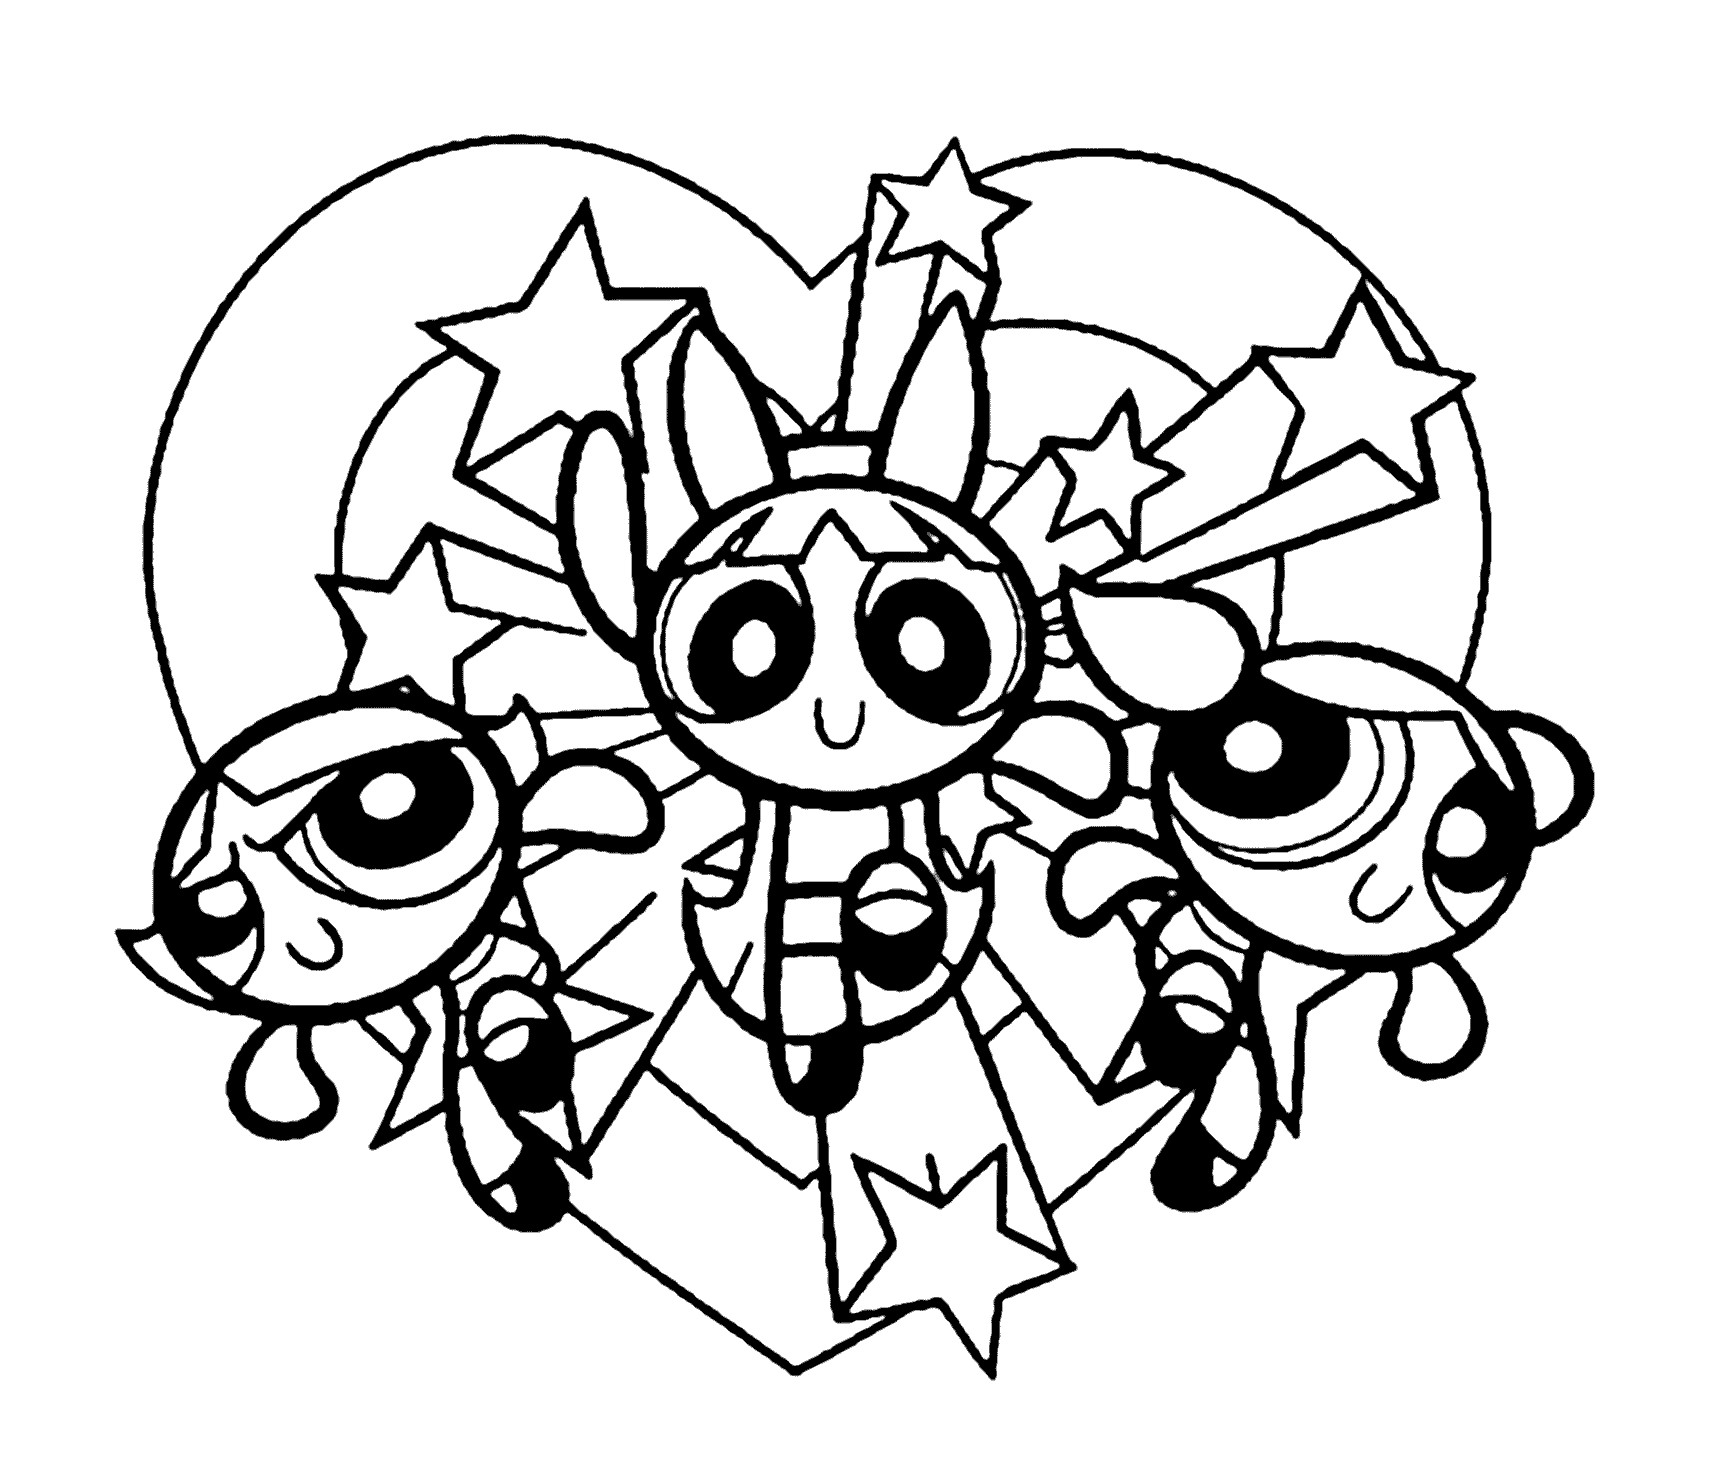 Powerpuff Girls Coloring Sheets
 Coloring Pages For Girls 9 10